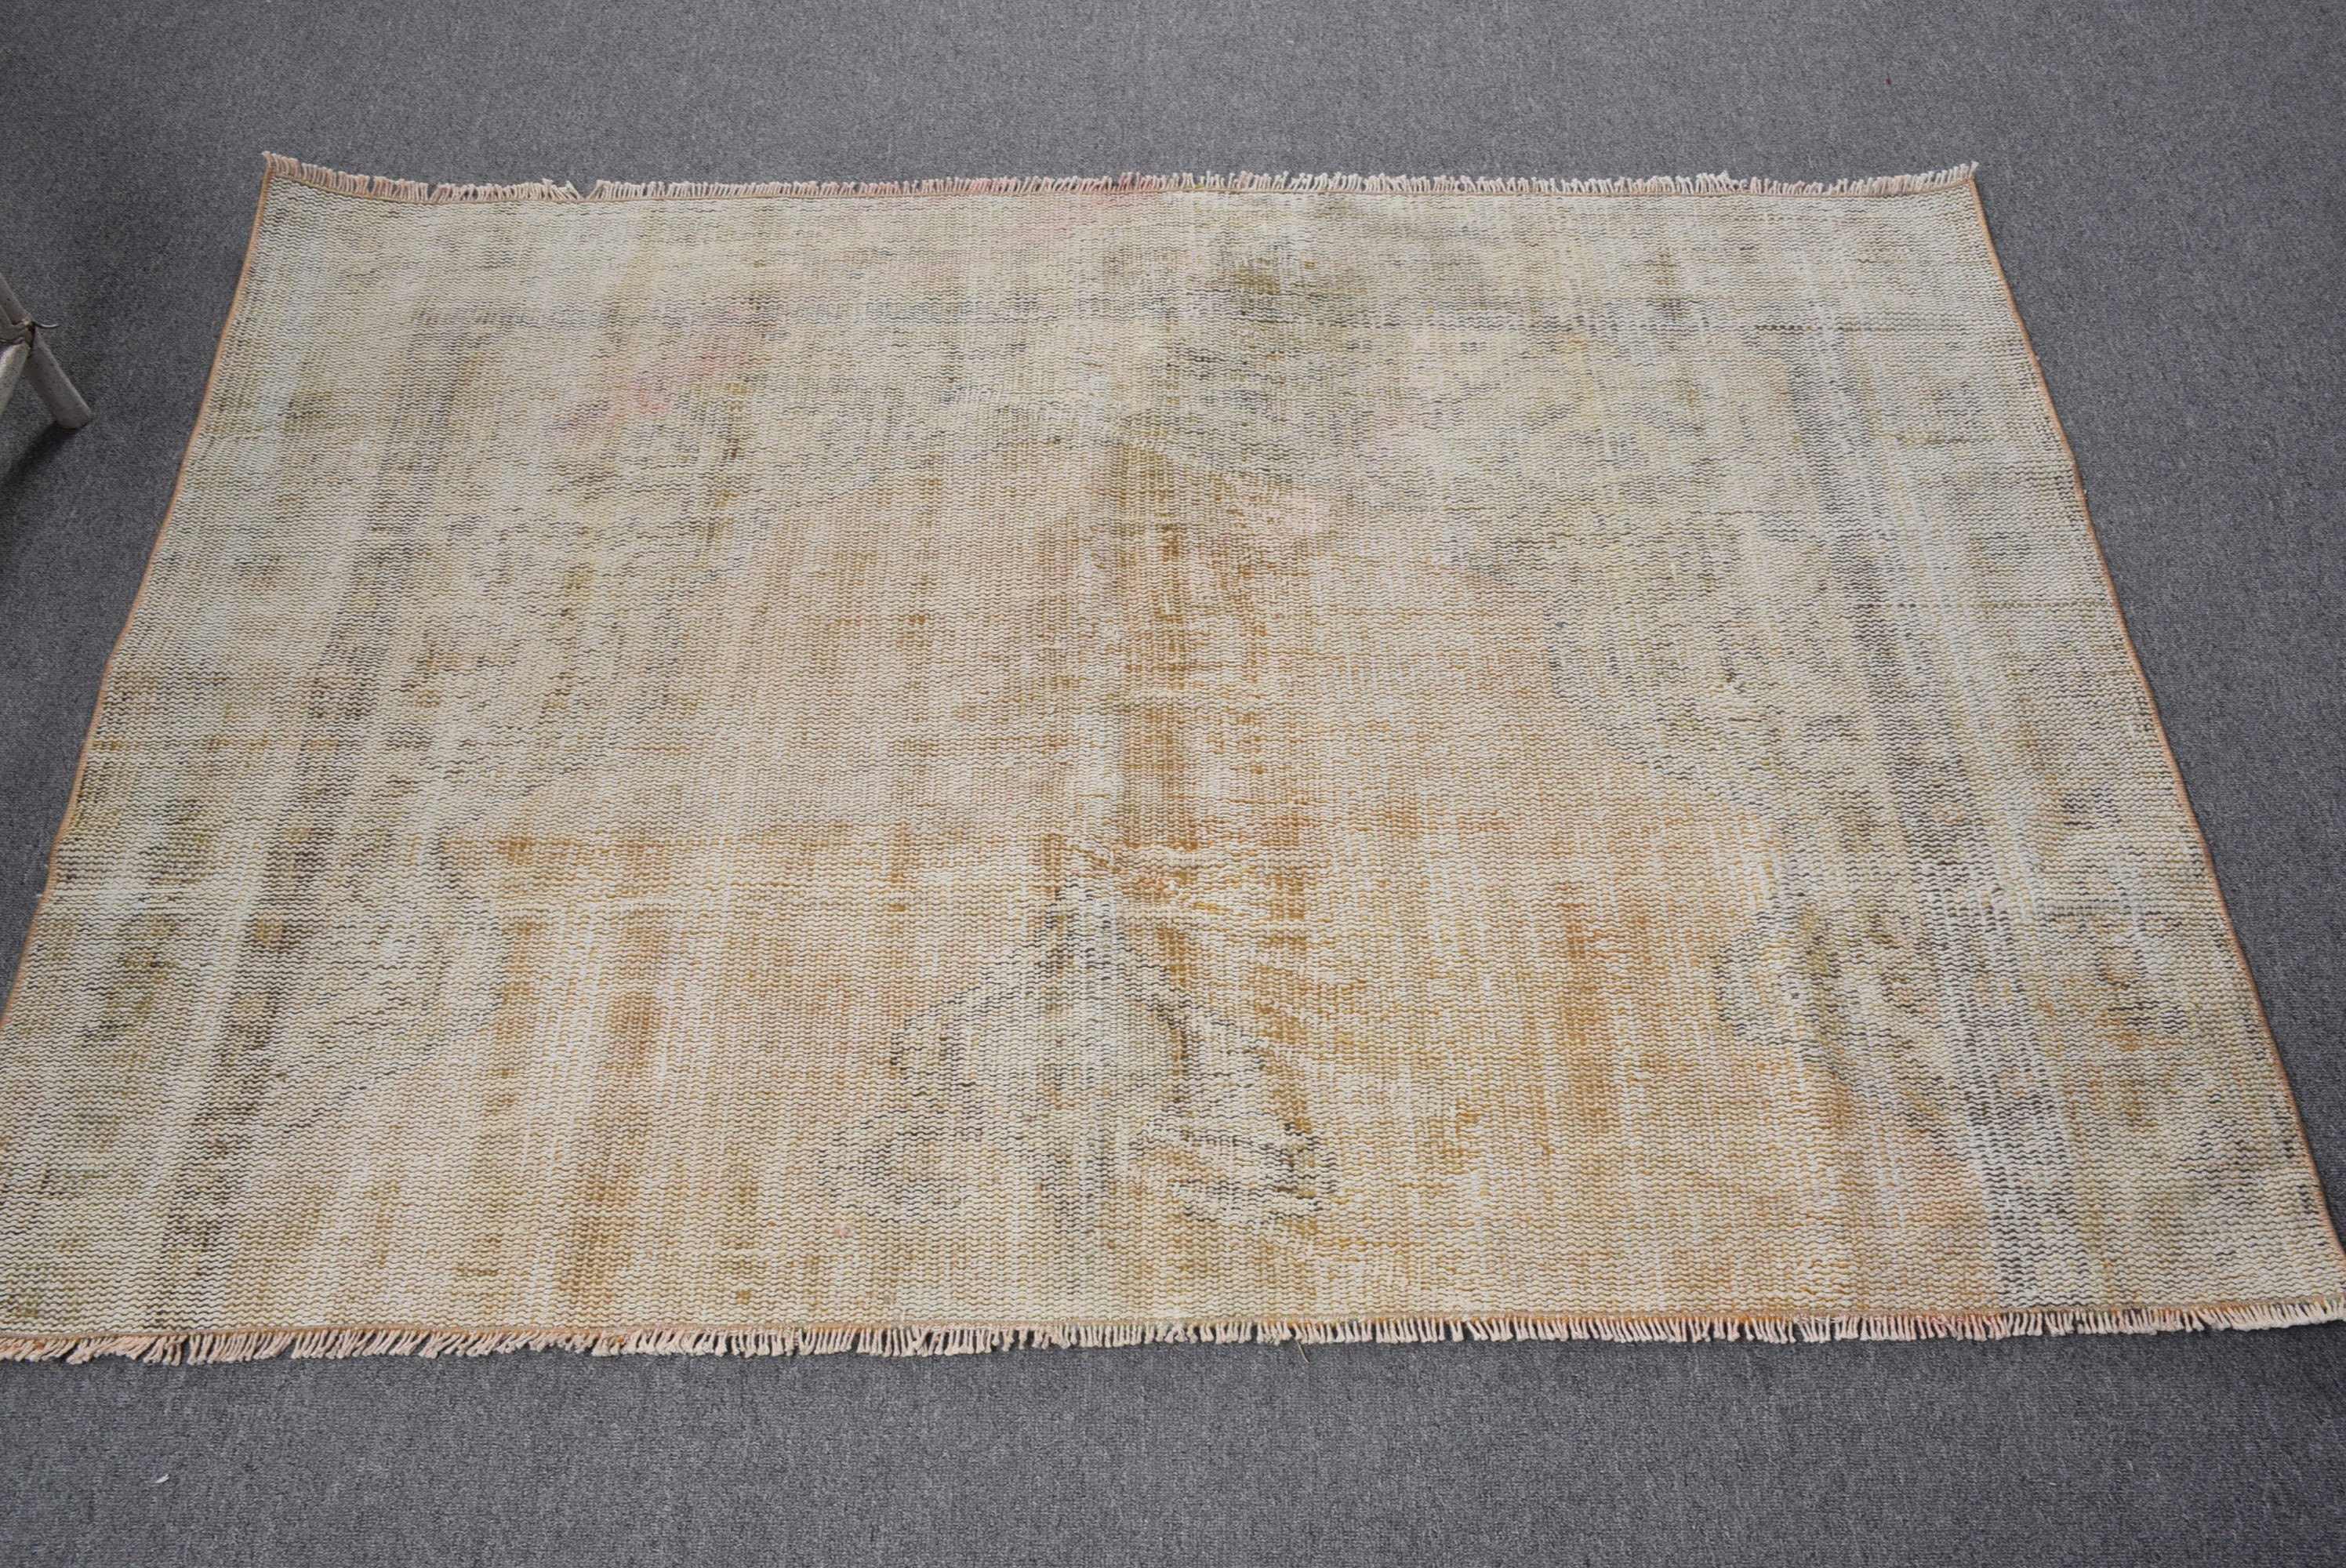 Bedroom Rug, 5.2x3.5 ft Accent Rug, Vintage Rugs, Entry Rug, Rugs for Entry, Anatolian Rug, Yellow Moroccan Rugs, Turkish Rugs, Muted Rugs